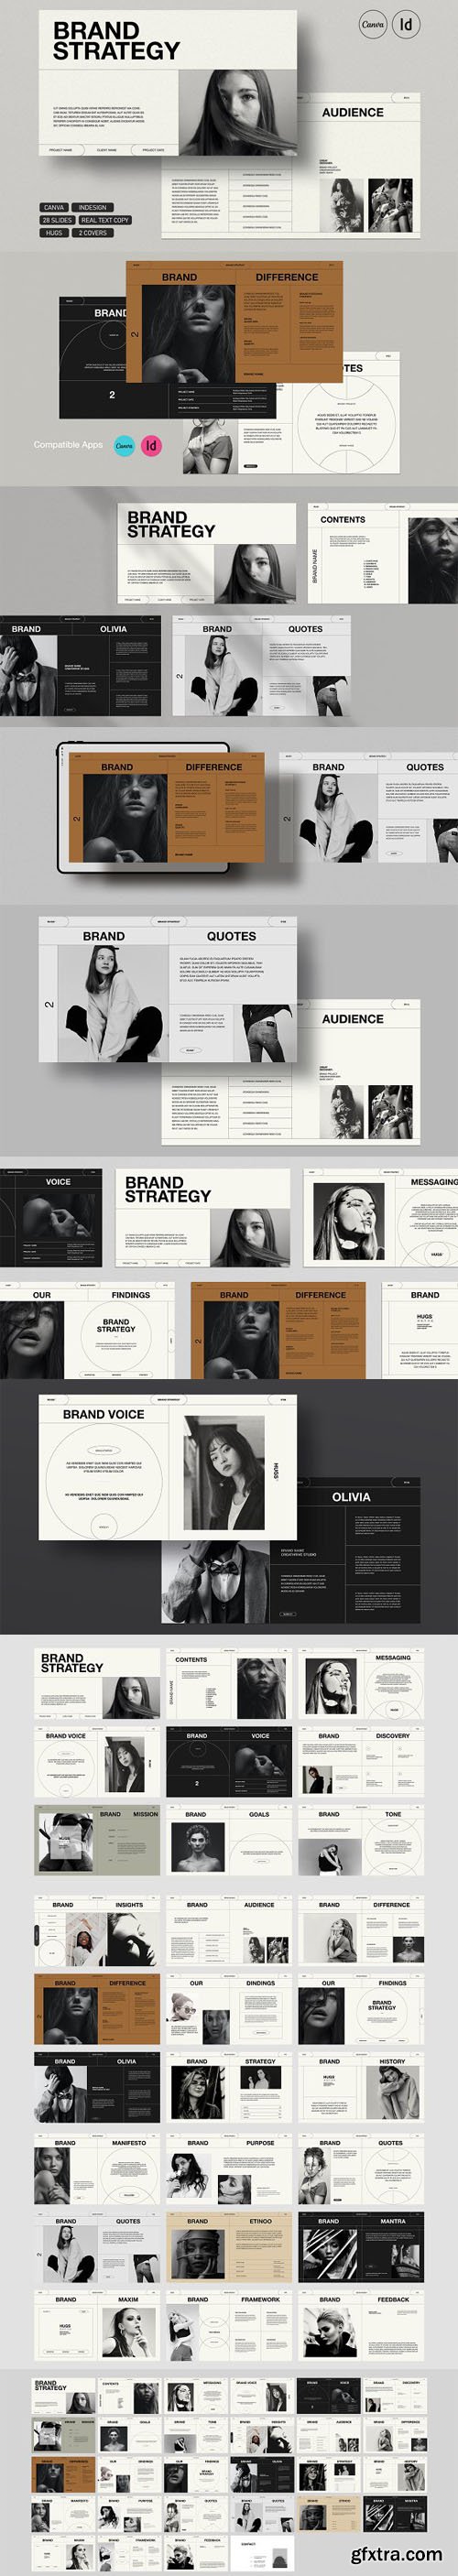 HUGS - Brand Strategy InDesign Templates